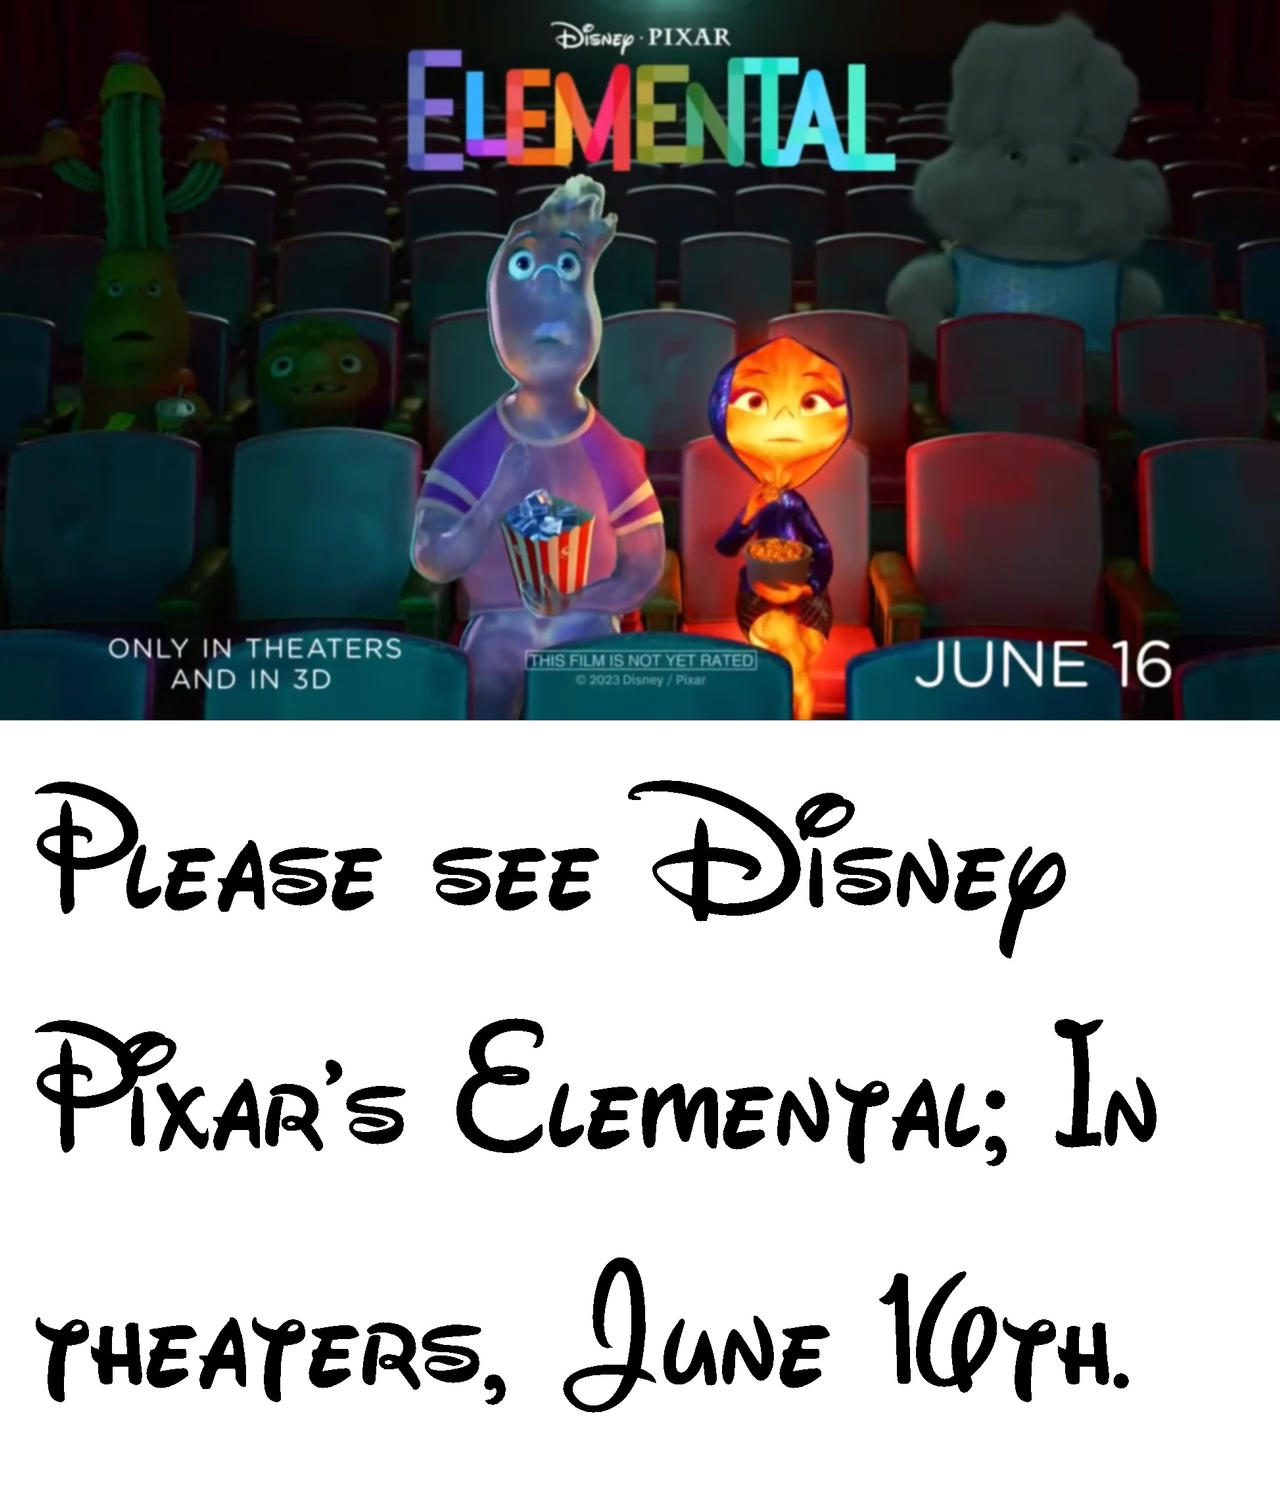 Disney-Pixar's Elemental reminds fans of Fireboy and Watergirl